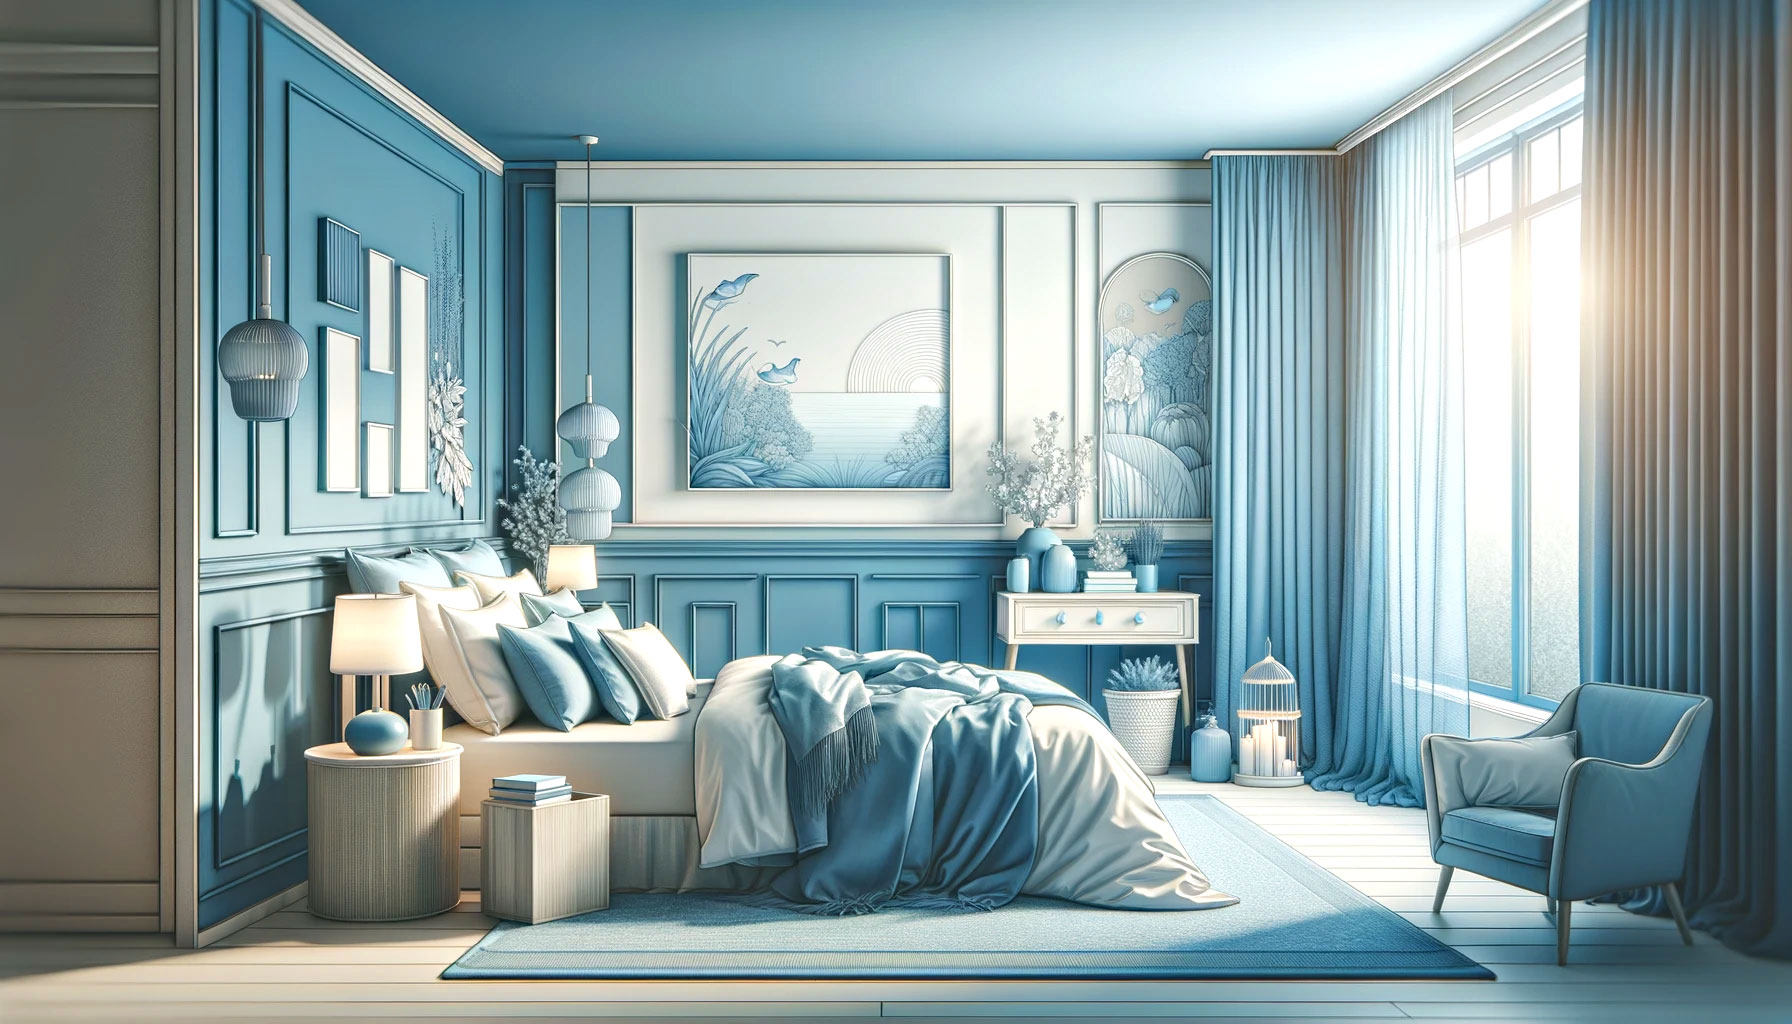 The Colour Psychology of Blue in Interior Design